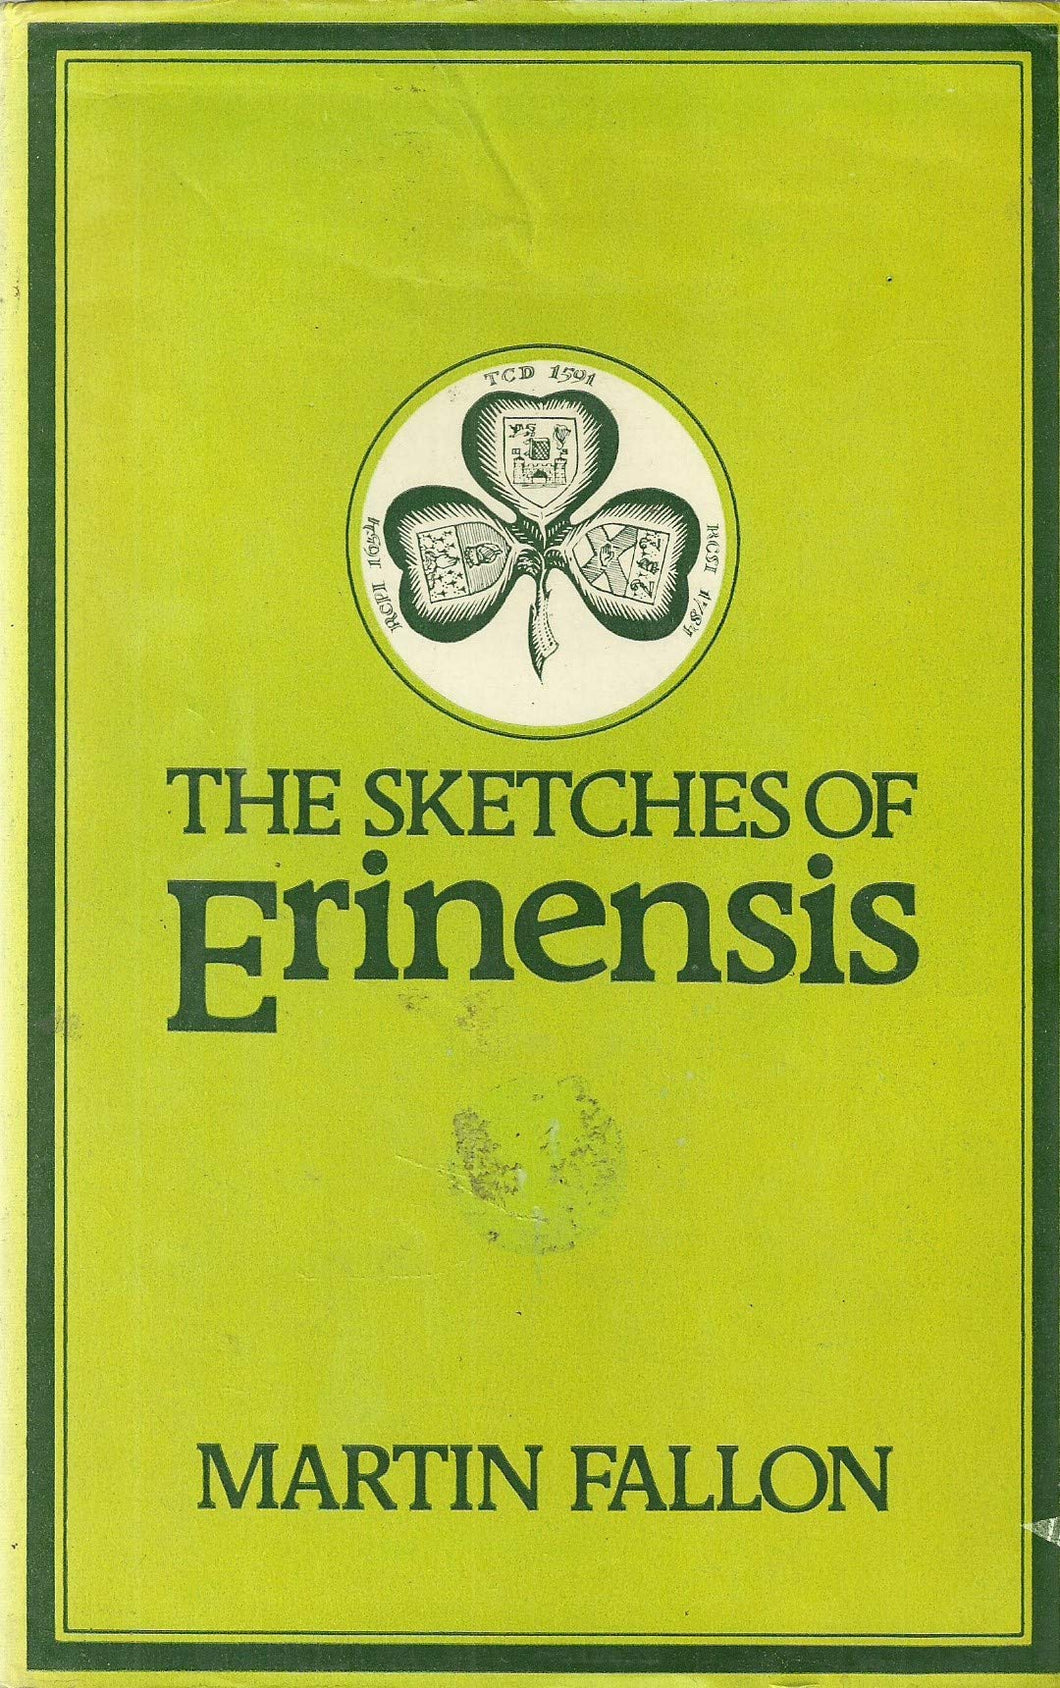 Sketches of Erinensis: Selections of Irish Medical Satire, 1824-36